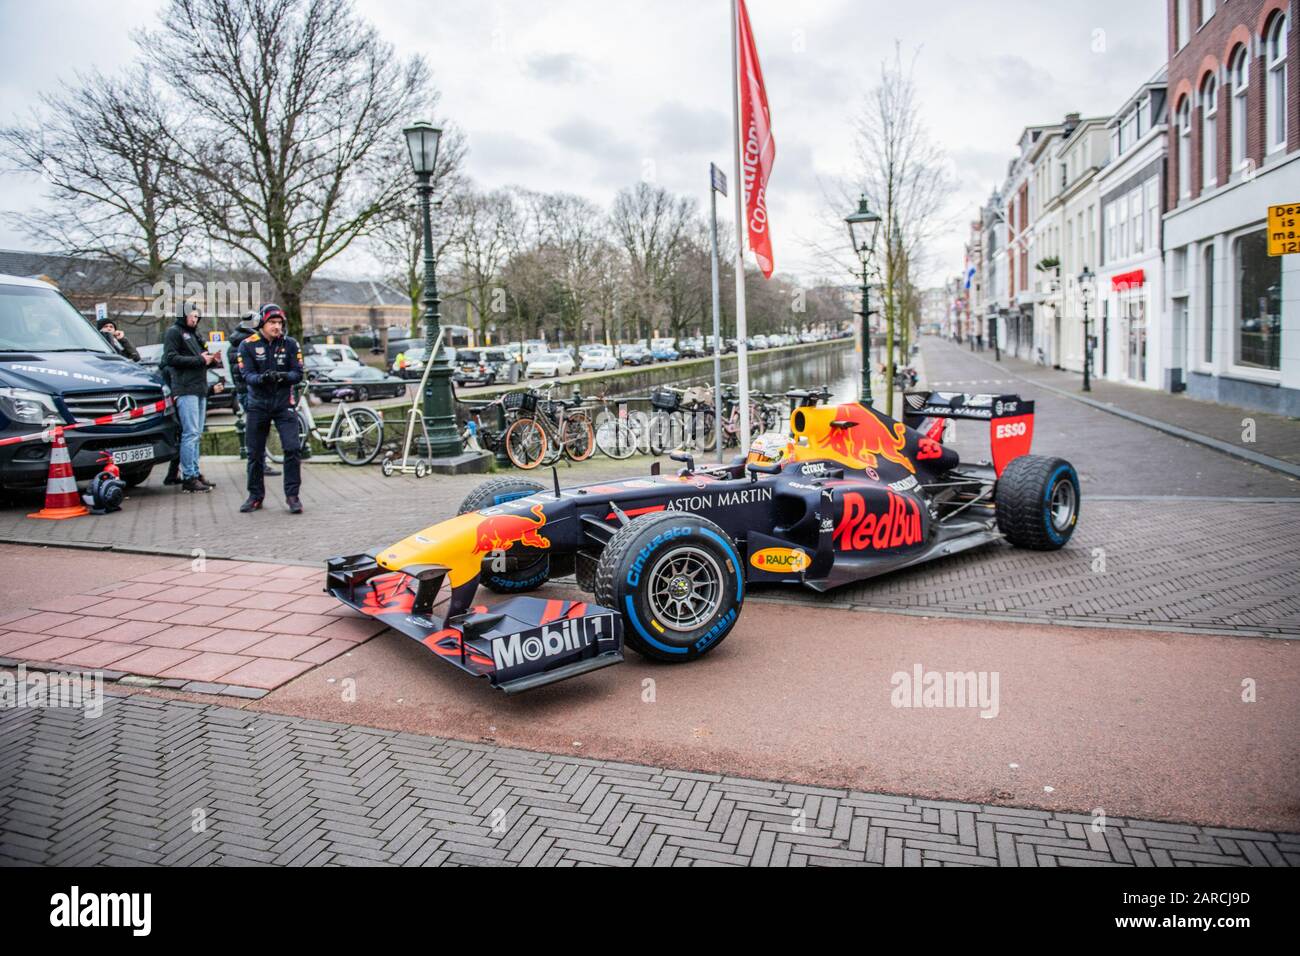 Den Haag, Netherlands. 27th Jan, 2020. DEN HAAG, 27-01-2020, Formula 1 cars from the Redbull Racing Team the center of The Hague. Redbull a promovideo for the Formula 1